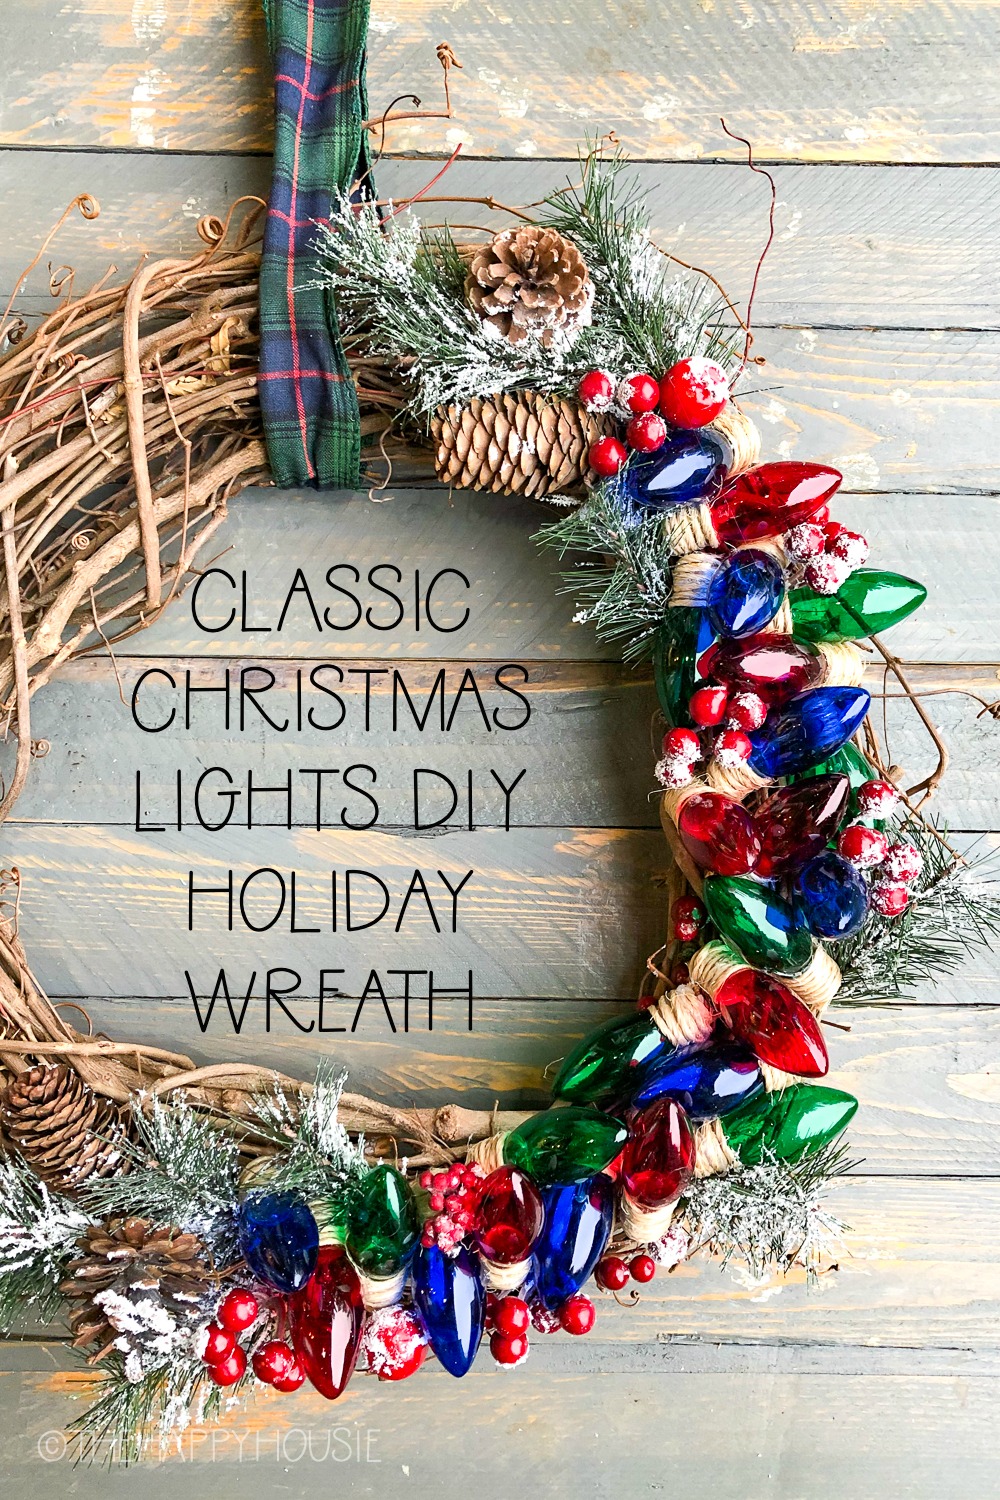 Classic Christmas Lights DIY Holiday Wreath with the wreath hanging on a wooden board.